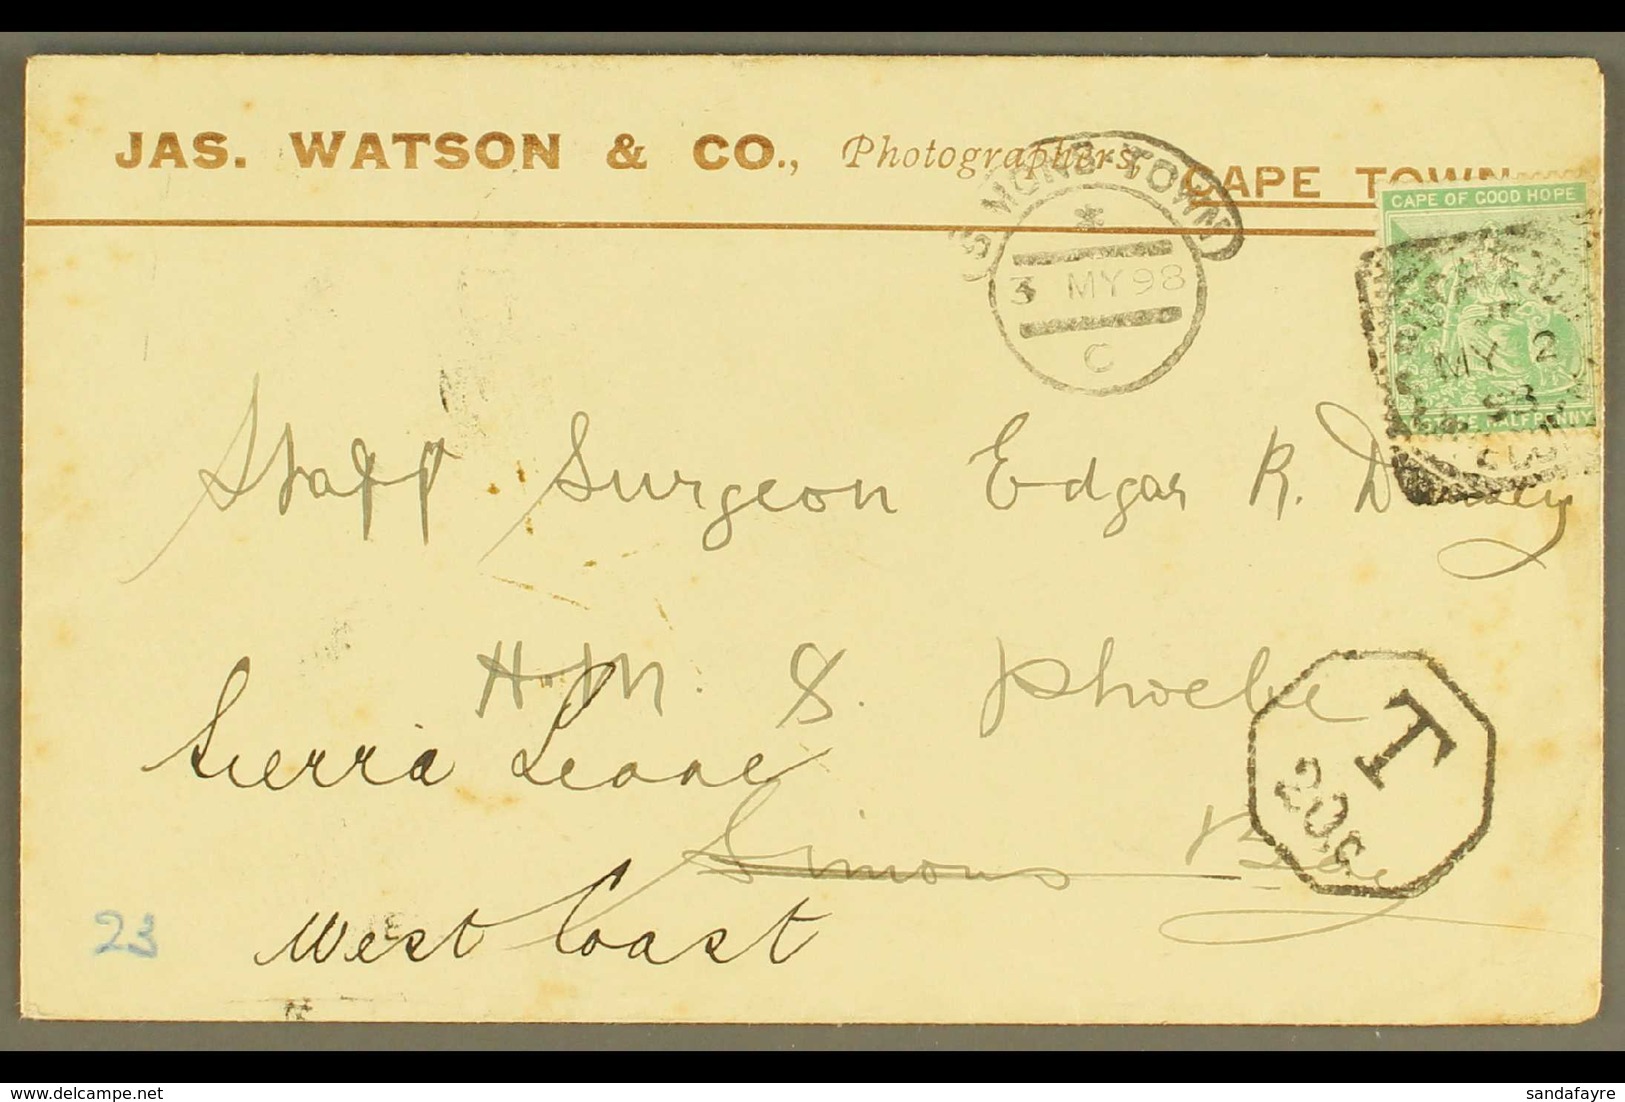 CAPE OF GOOD HOPE  1898 (2 May) Printed Envelope For "Jas. Watson & Co., Photographers, Cape Town" Addressed To Staff Su - Ohne Zuordnung